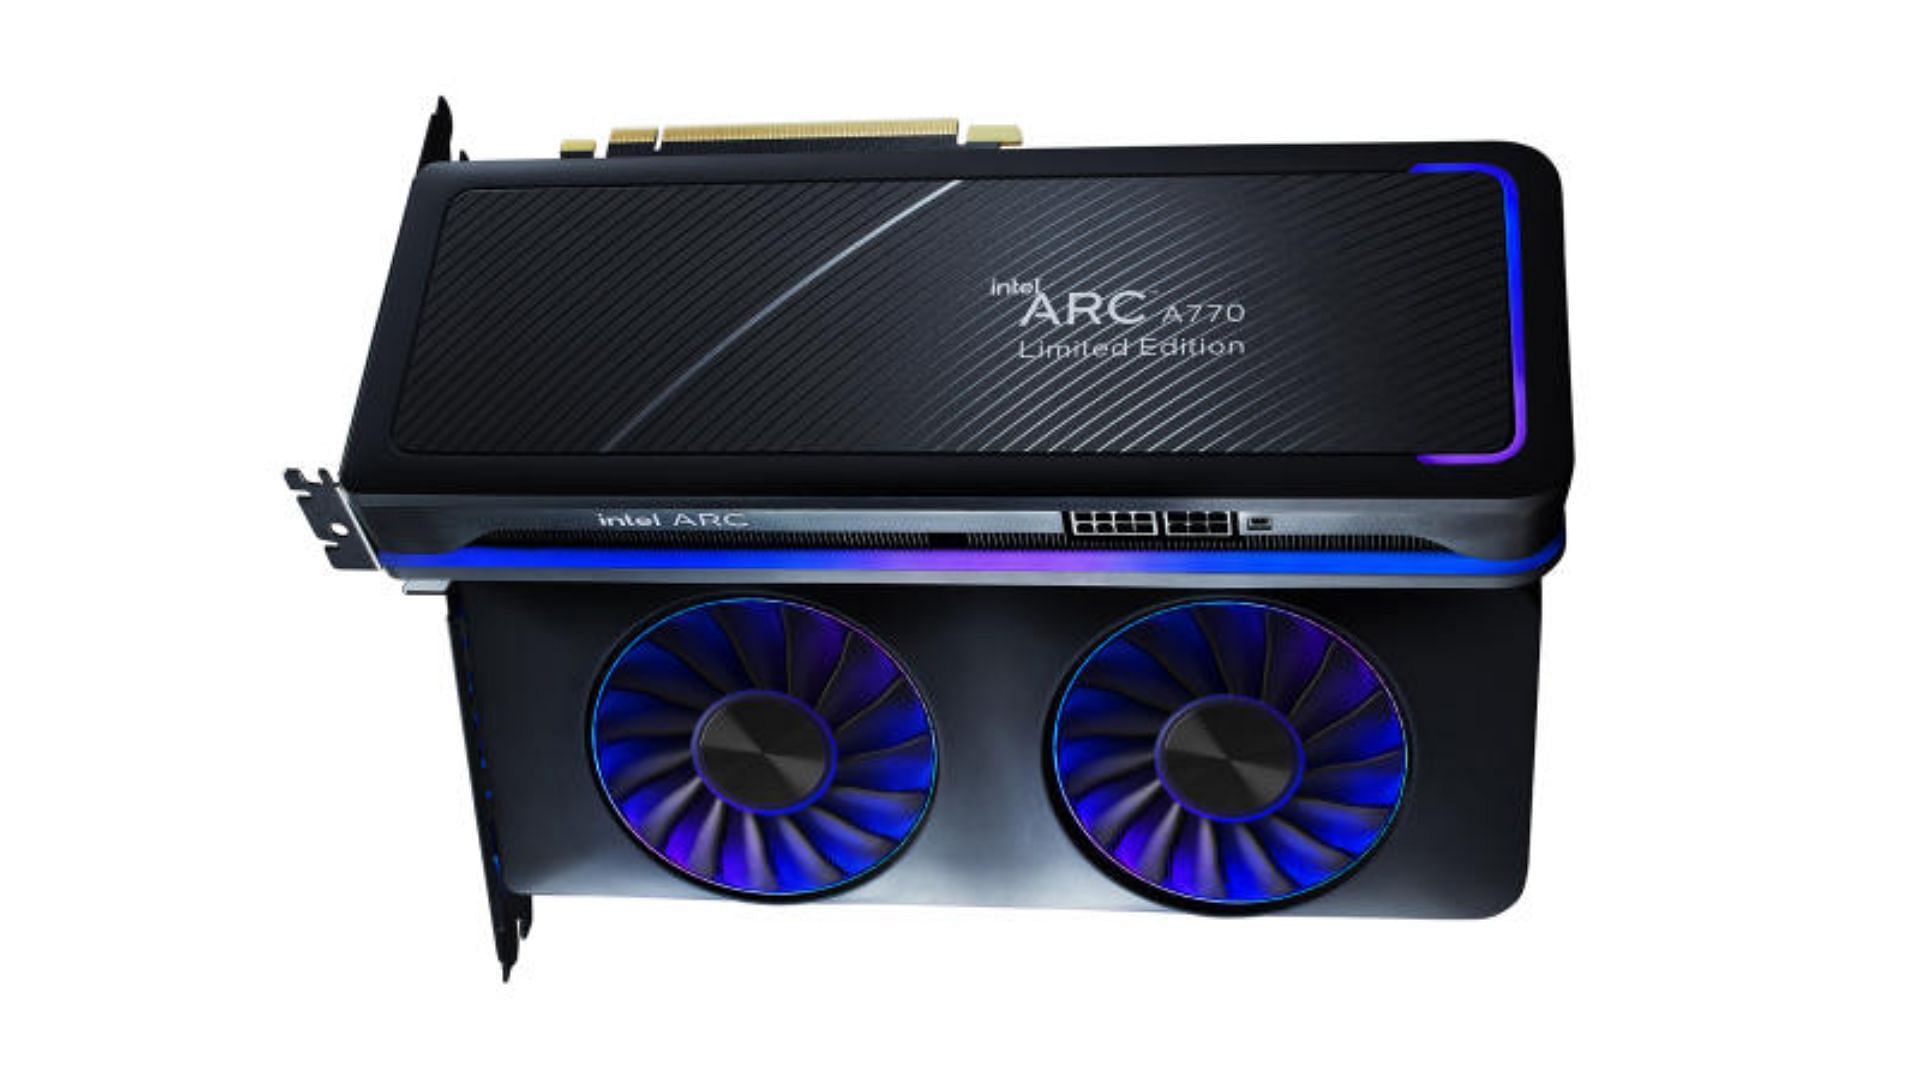 Acer unveils Intel ARC A770 as company's first consumer GPU